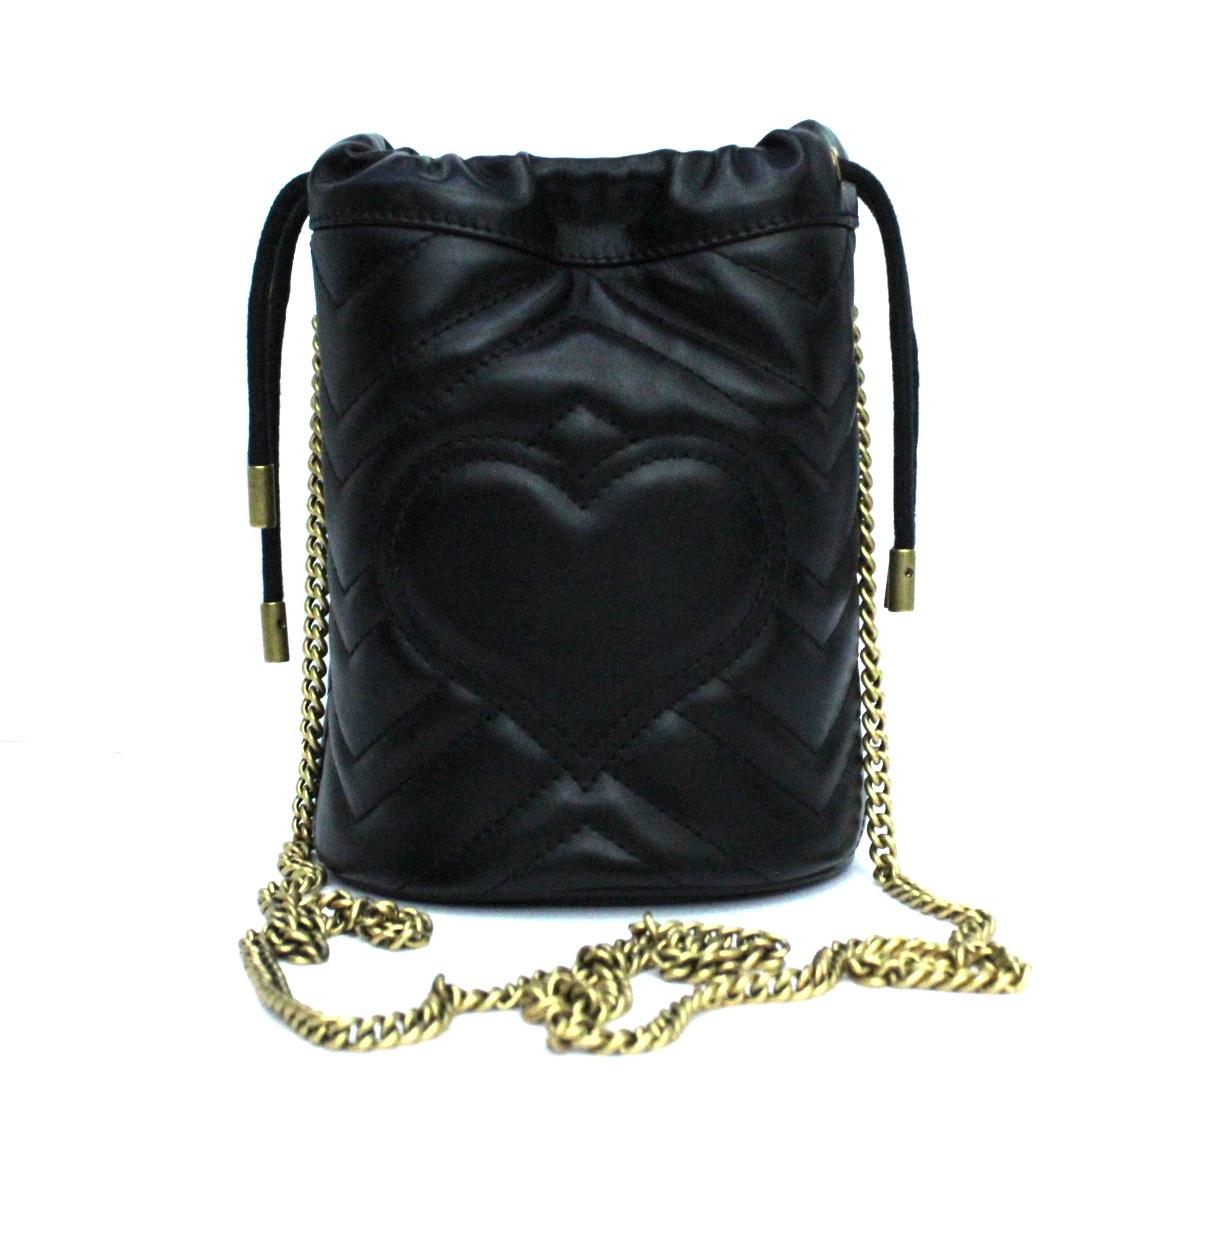 Gucci Black Leather Marmont Bag 1